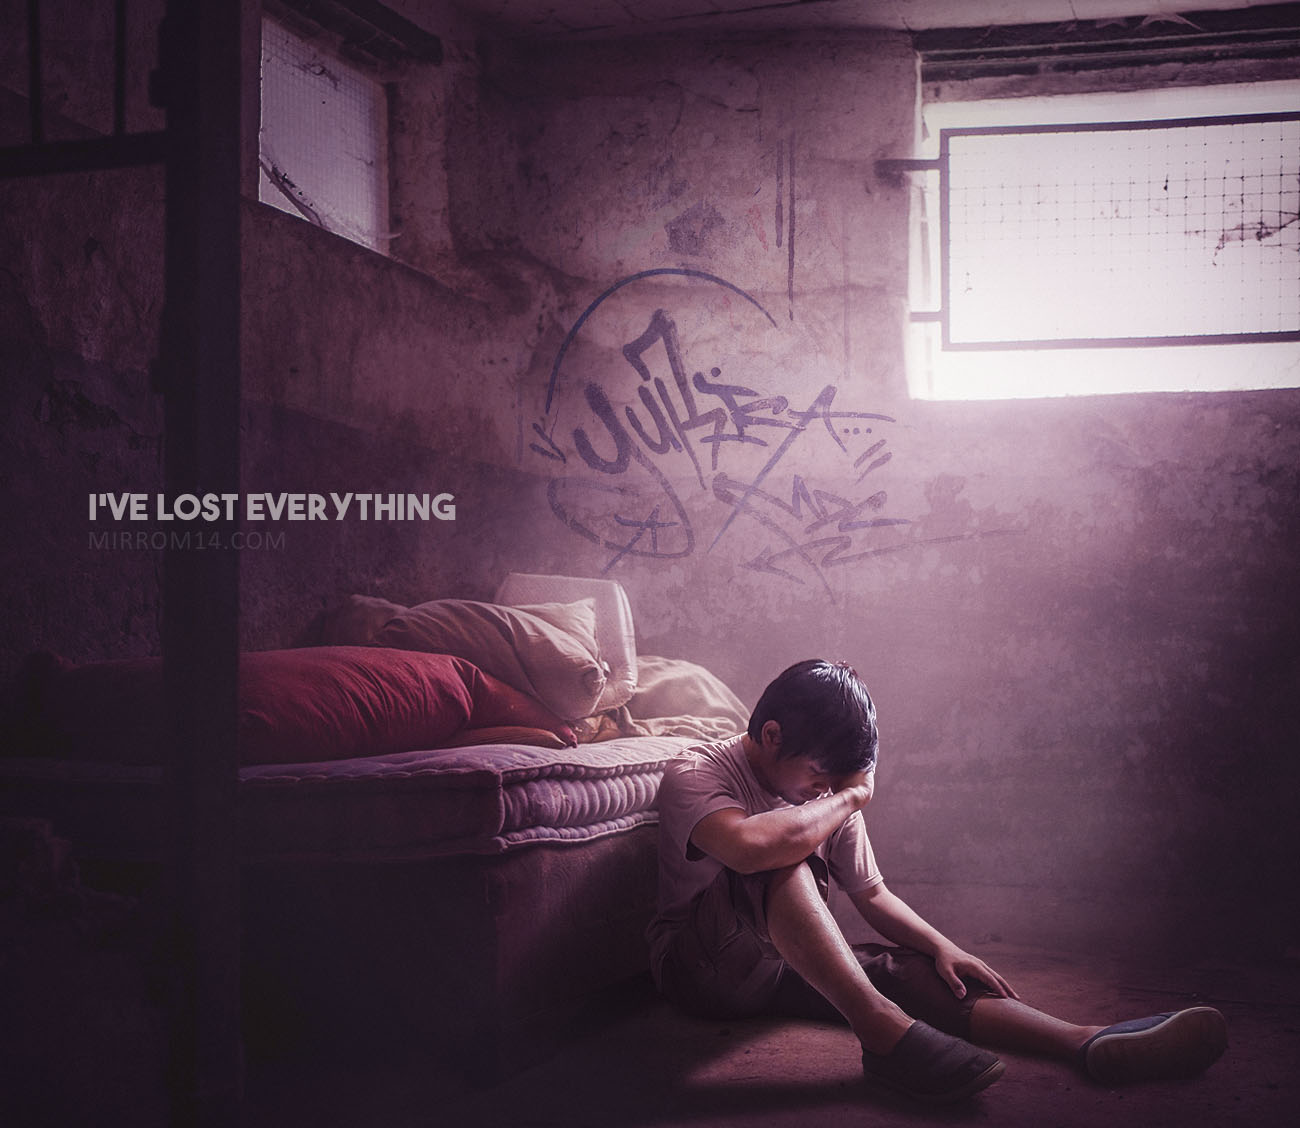 Photo Manipulation Soft Light Color Effects - I've Lost Everything